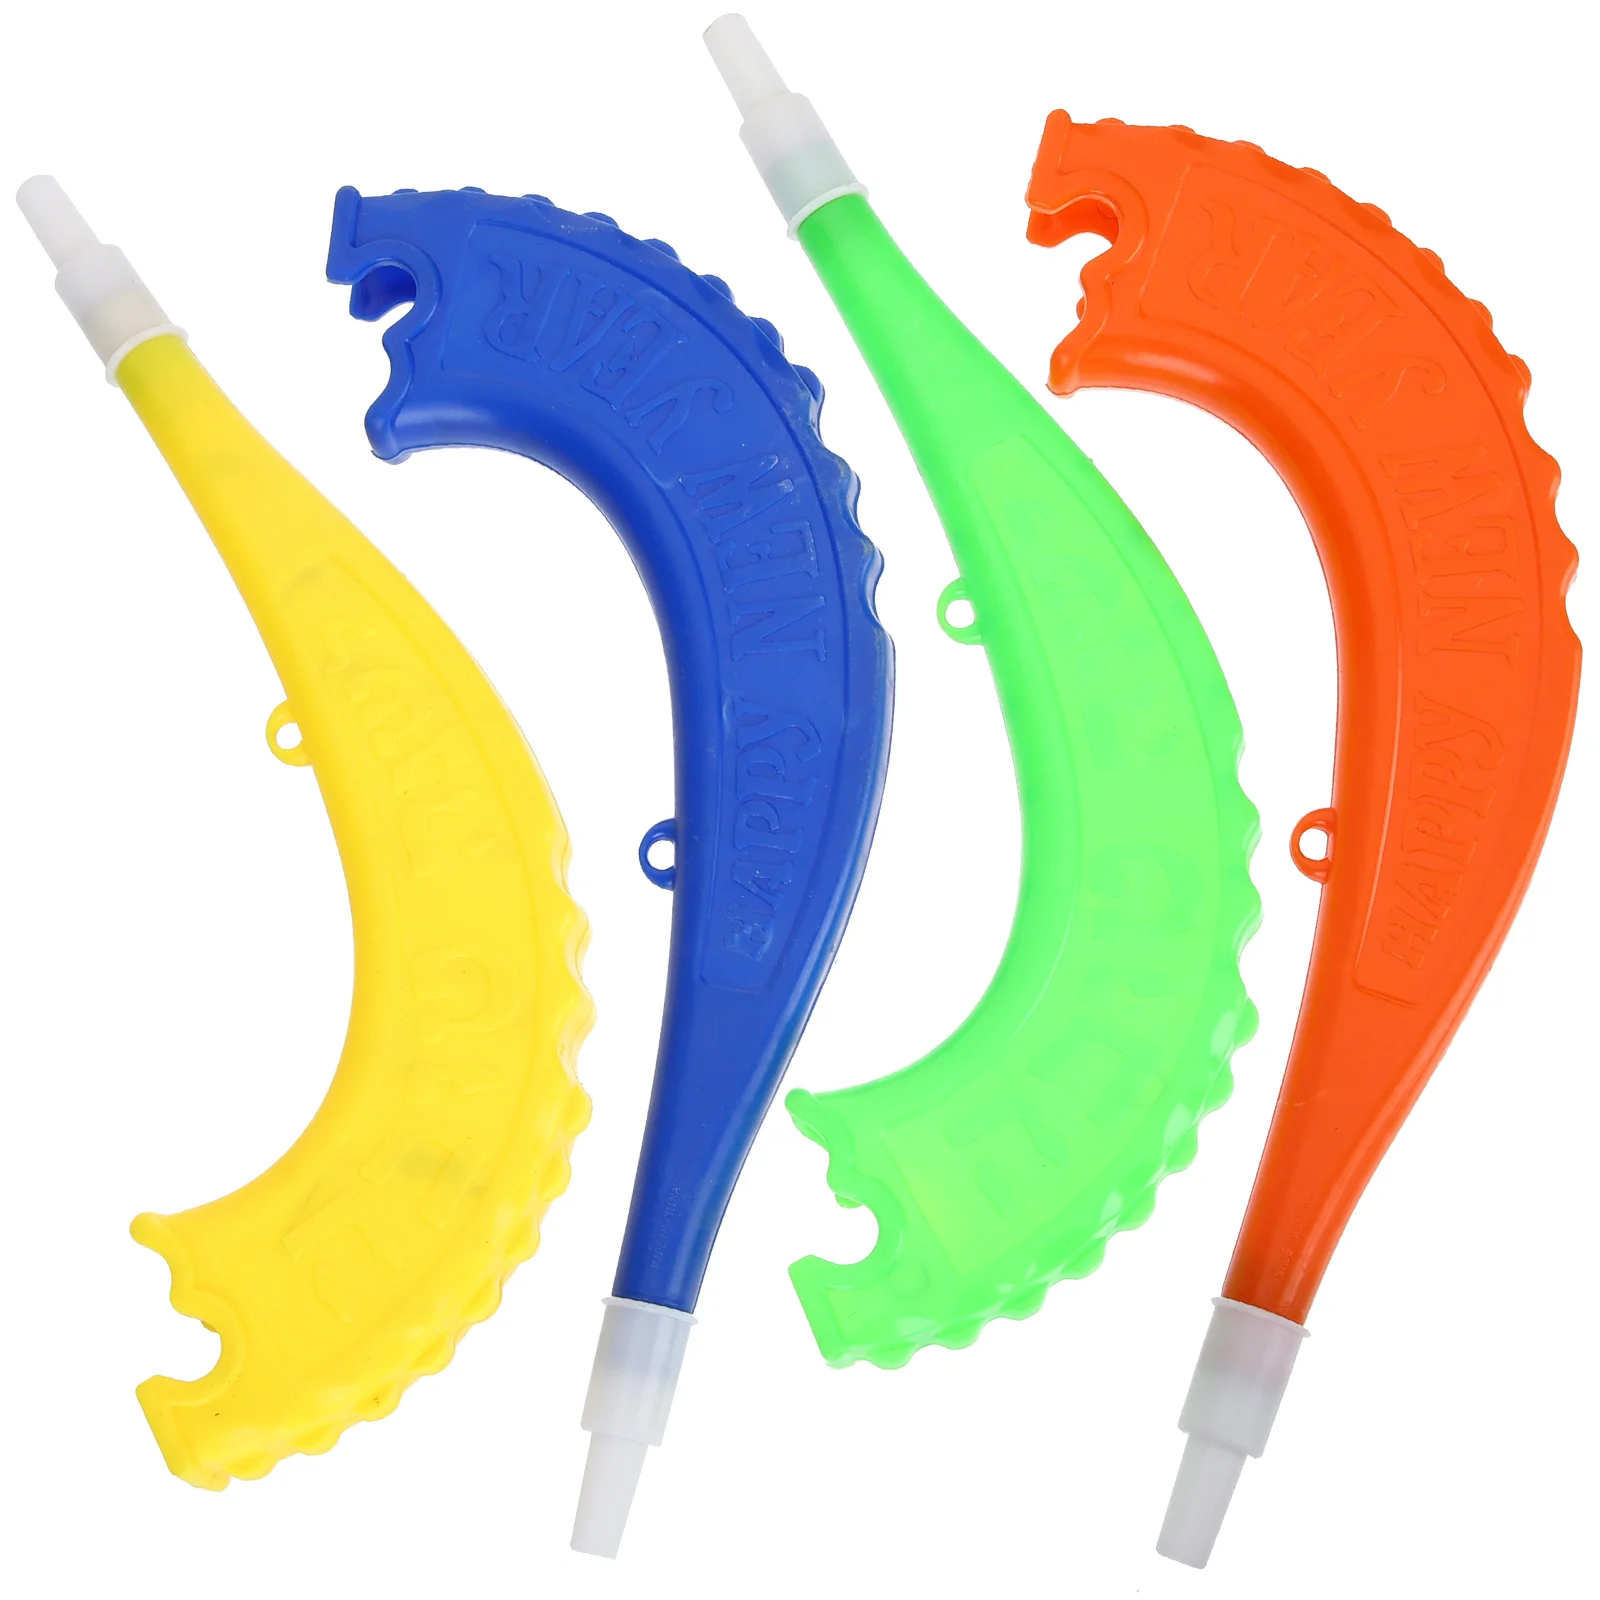 4 Pcs Toys Curved Horn Cheer Air Party Horns Cheerleading Fans Pump Cheering Prop Child 6 pcs cheer squad pom poms cheerleading prop outdoor the match reusable cheerleader cheering plastic decorative